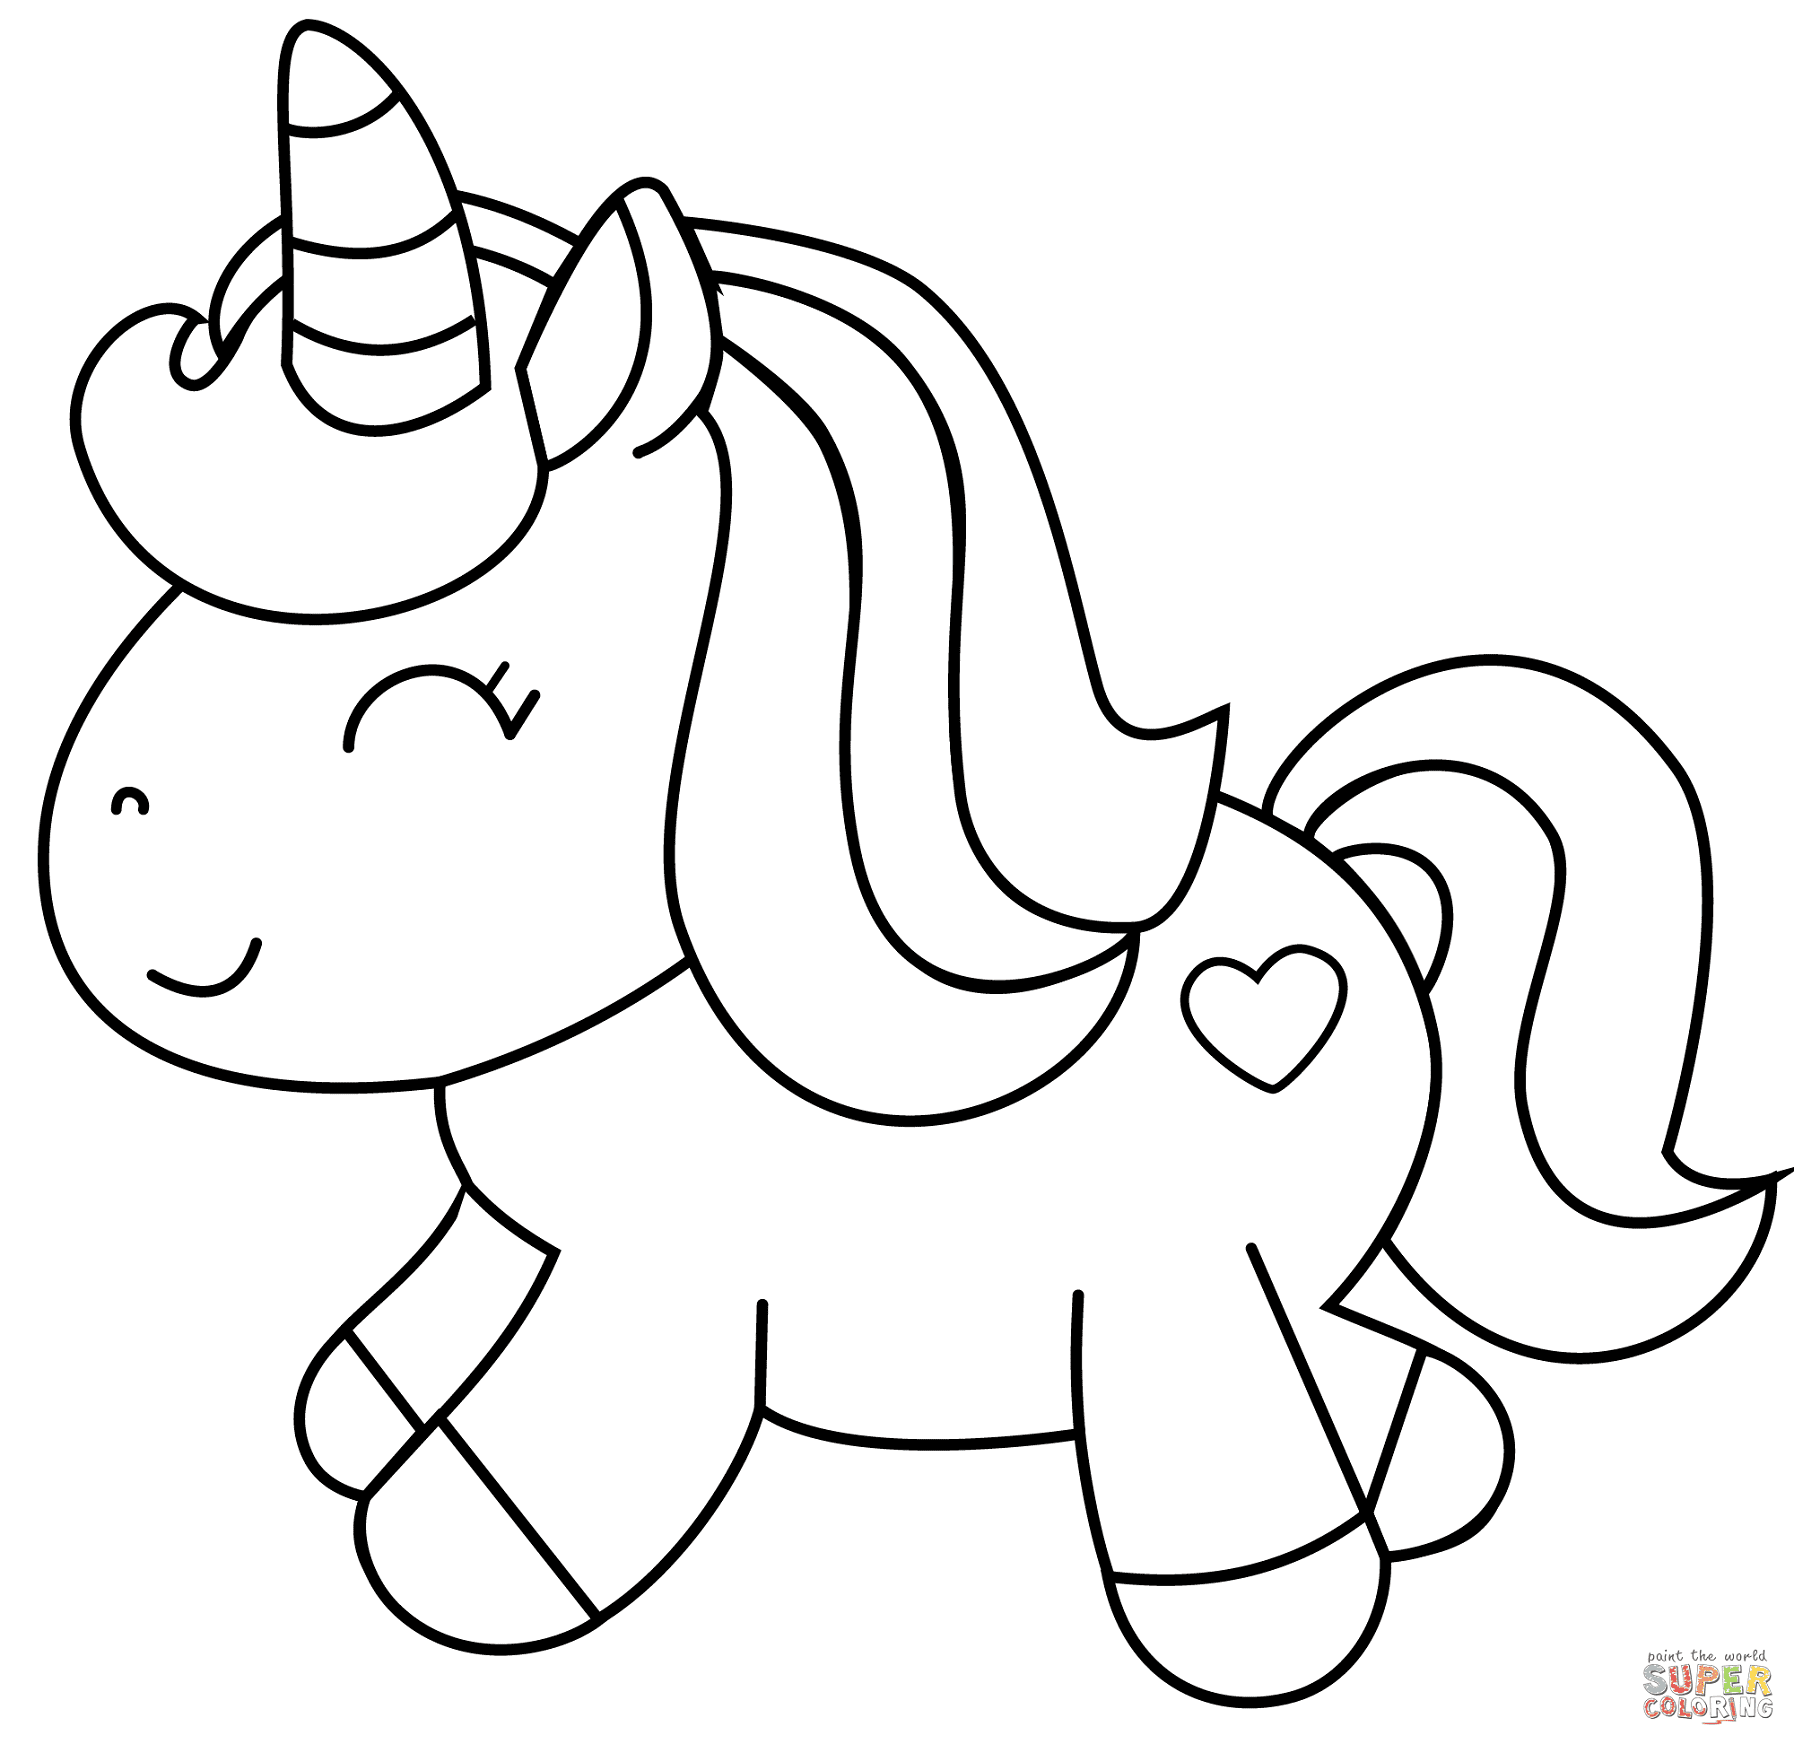 Cute Unicorn Coloring Pages From Printable Unicorn Coloring Pages Porn Sex Picture